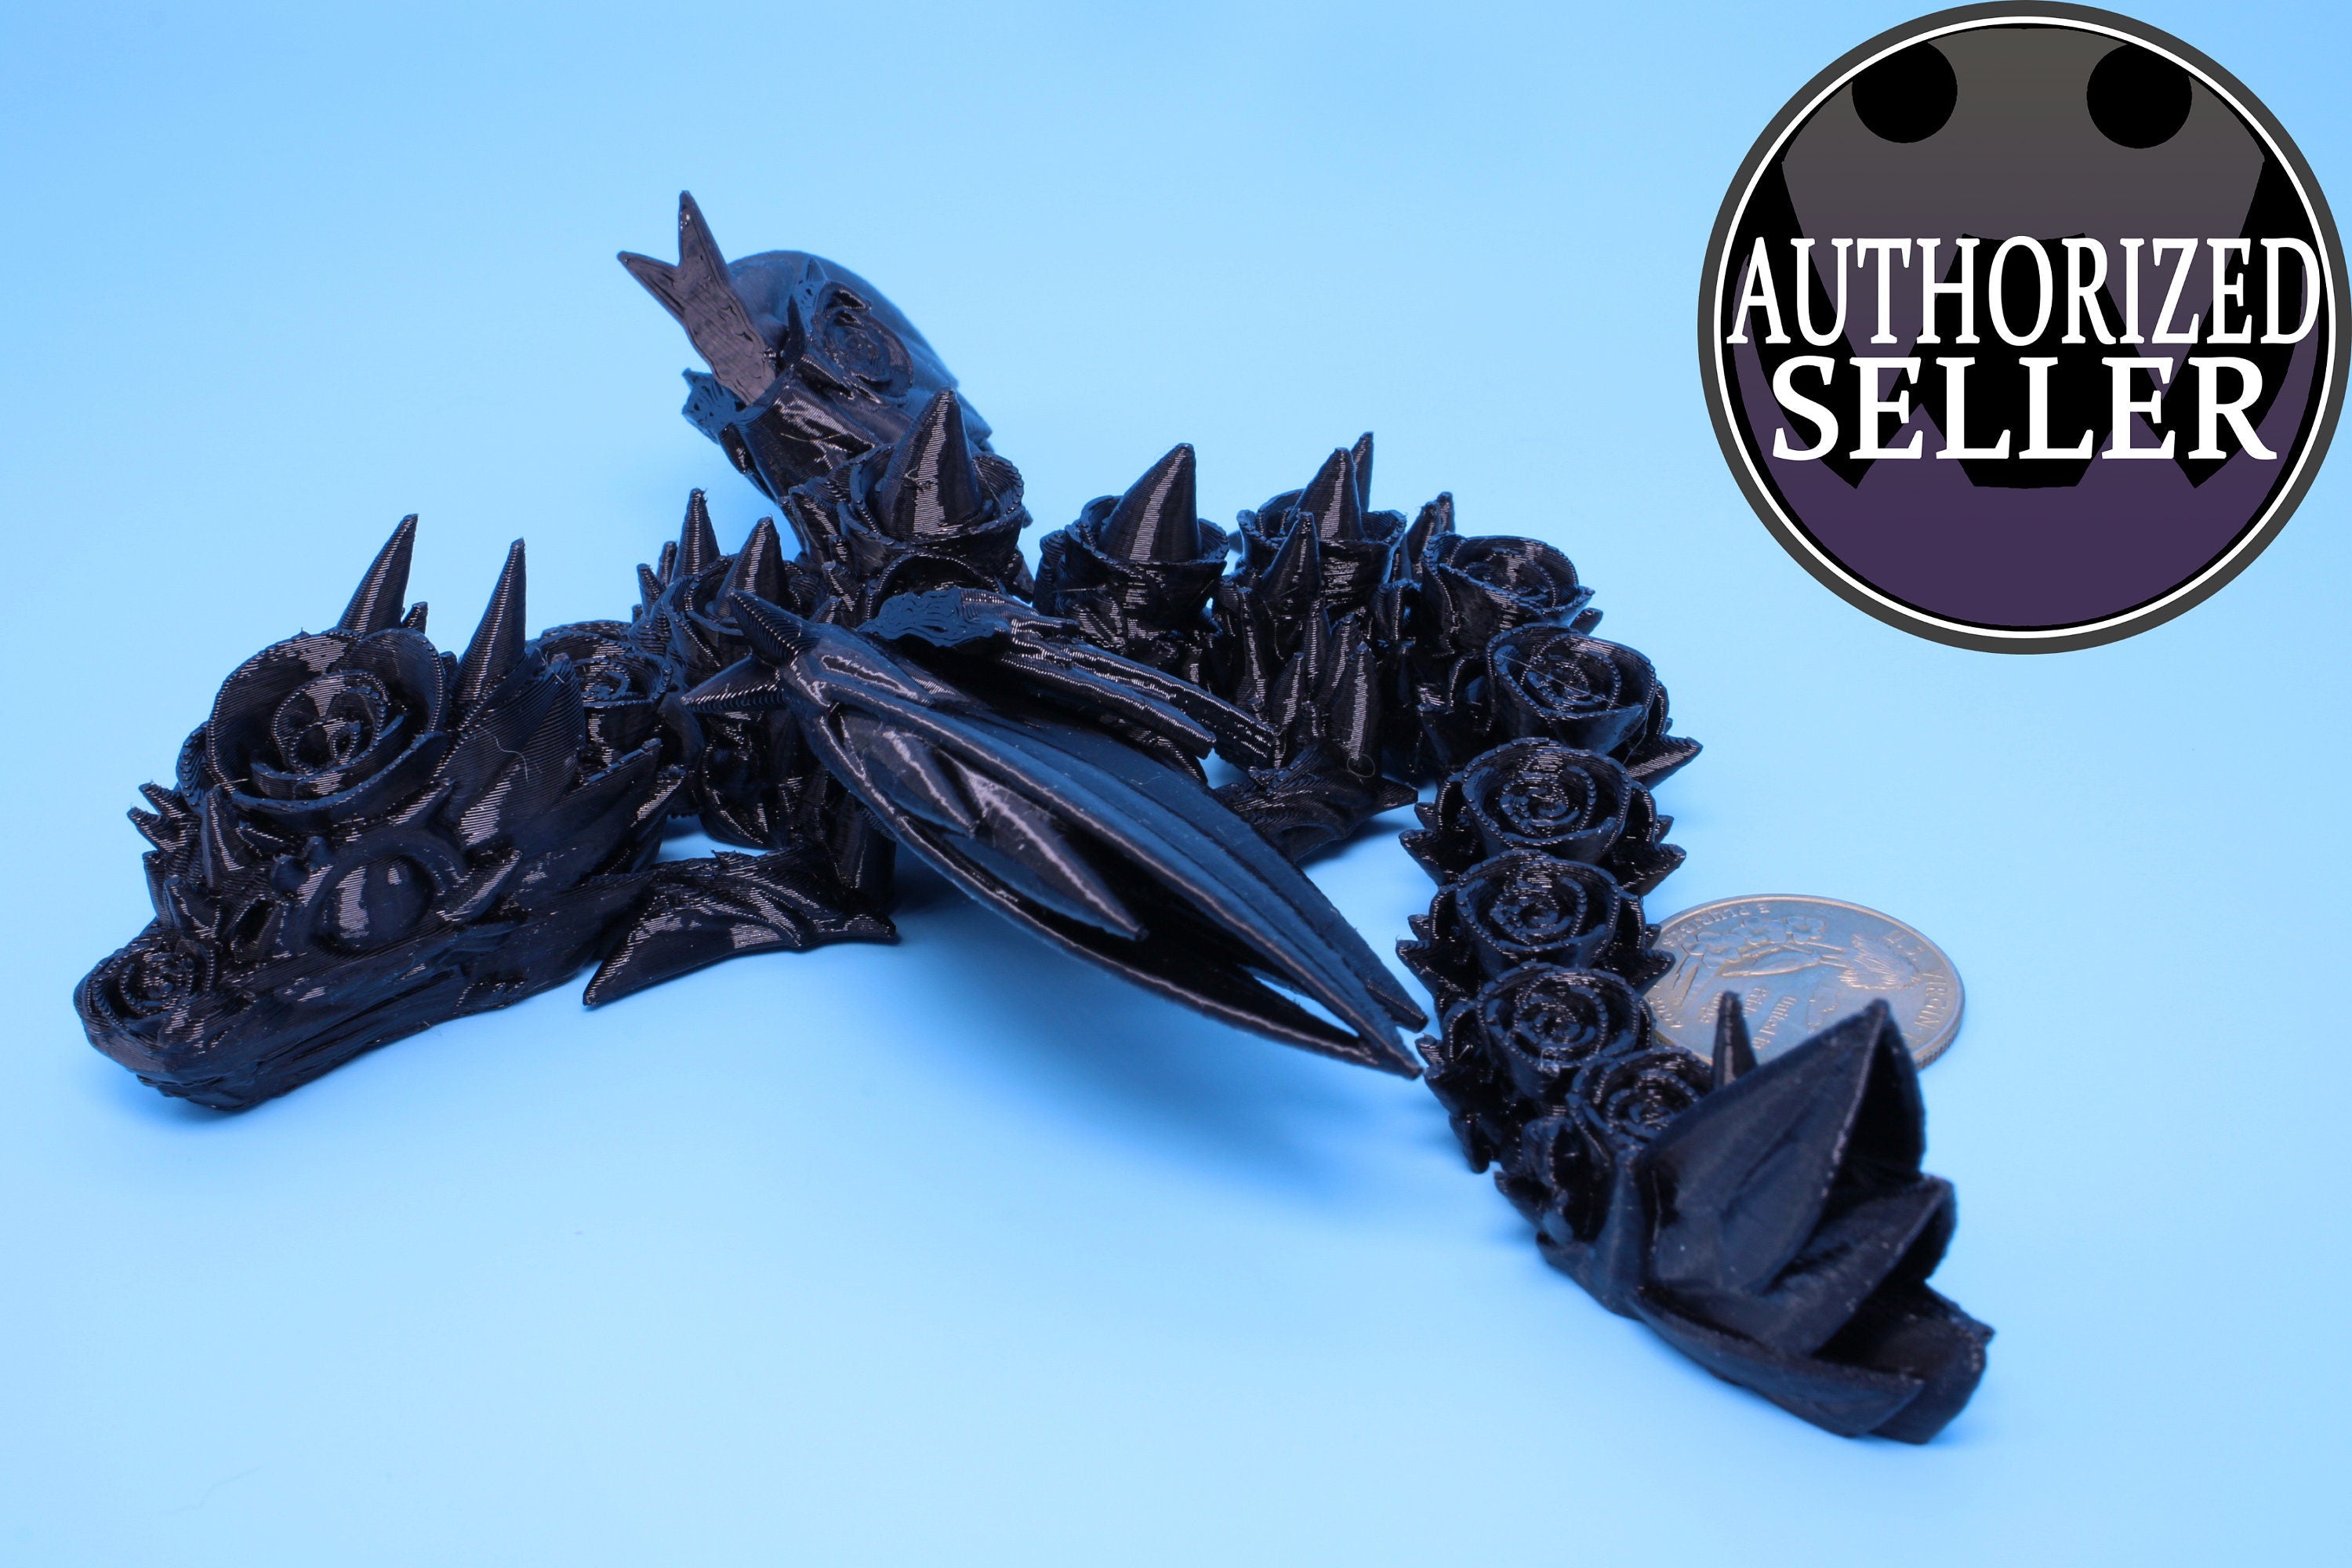 Baby Rose Wing Dragon | Black | 3D Printed | Fidget | Flexi Toy 8.5 in. | Stress Relief Gift